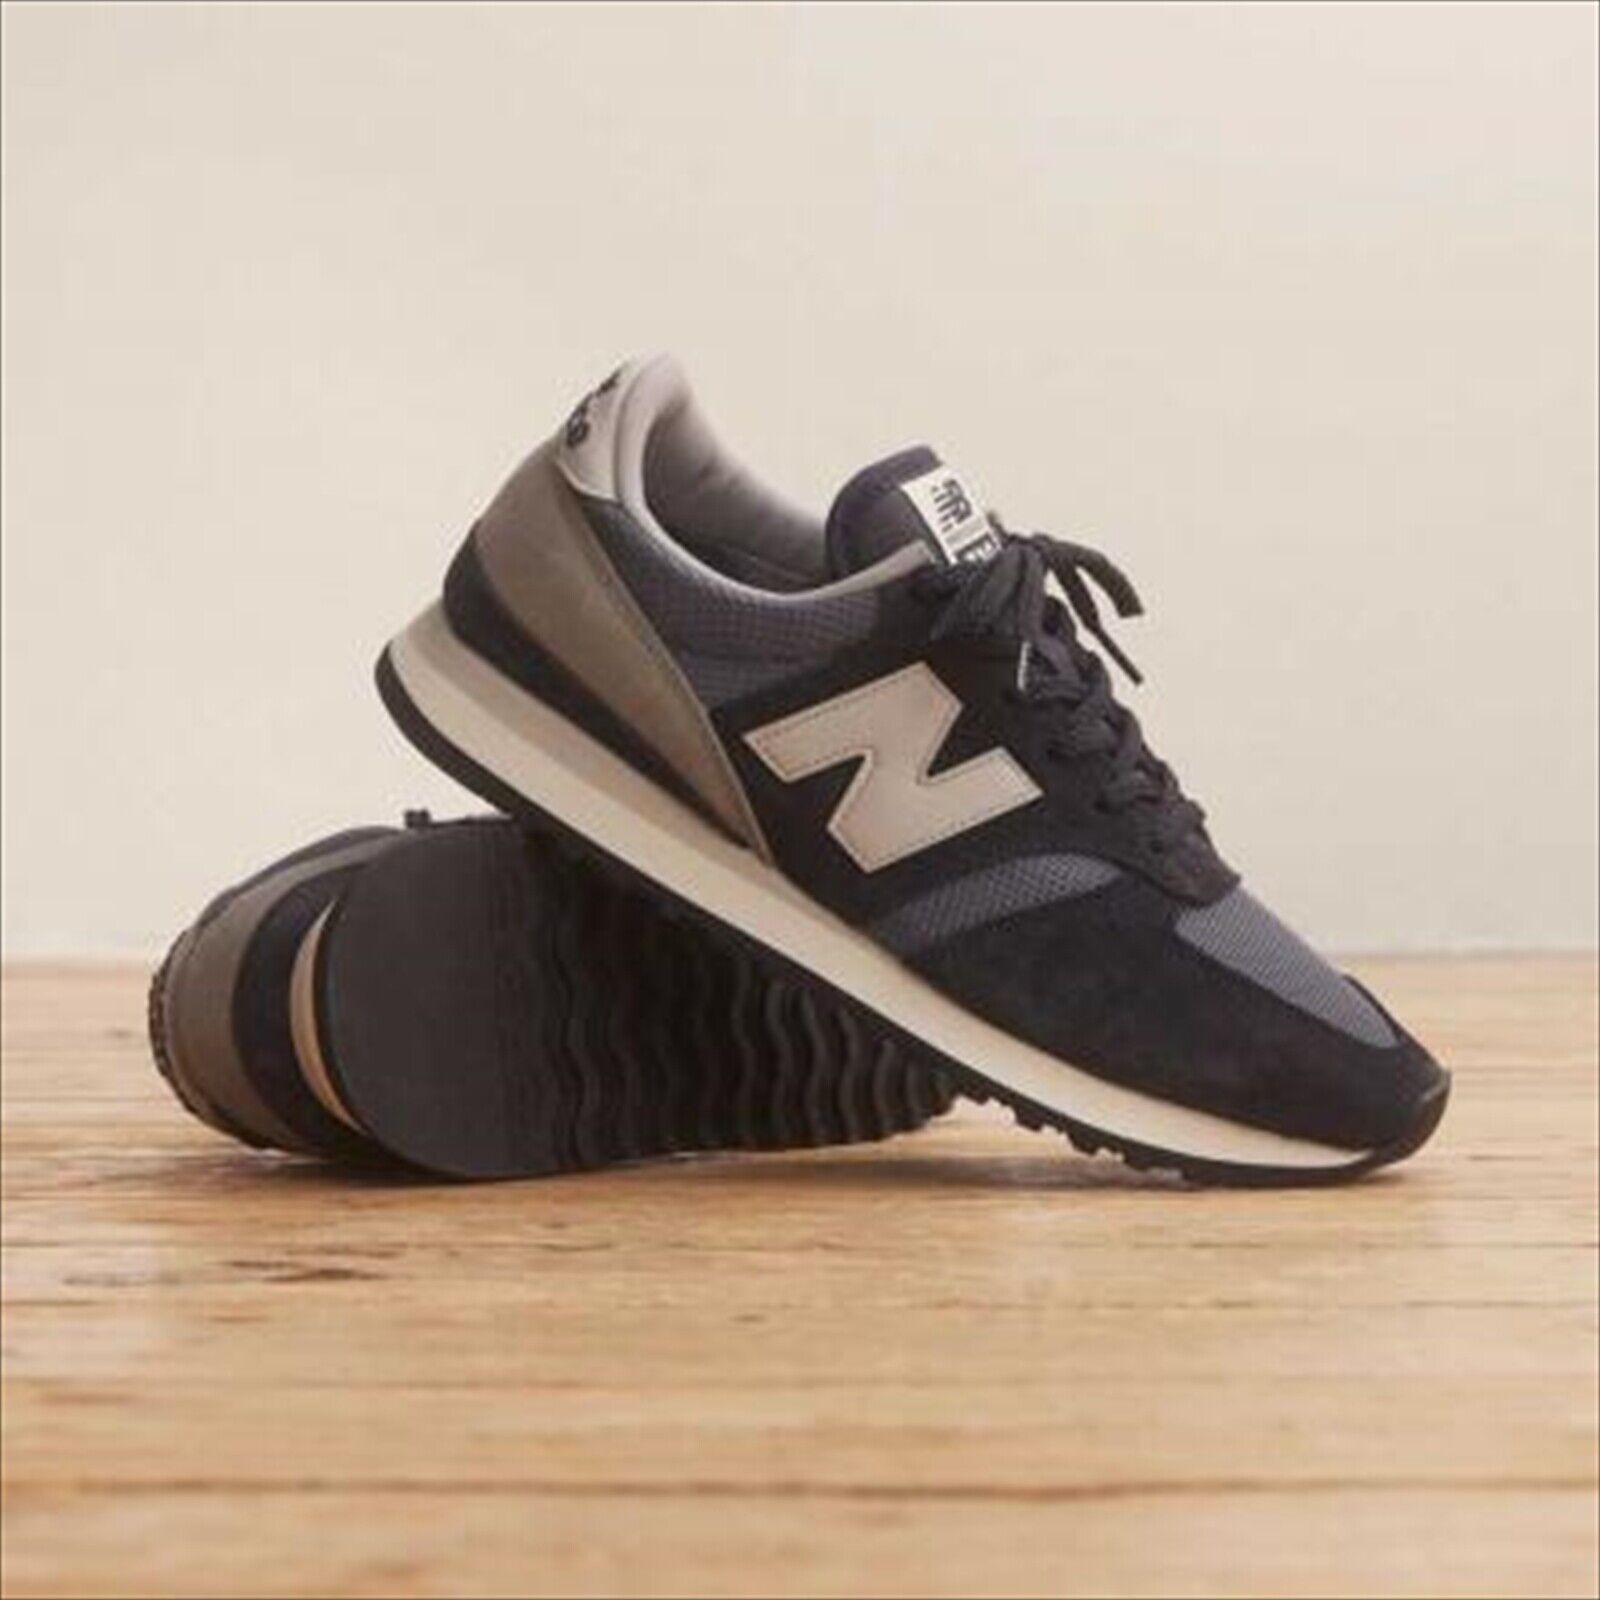 NEW BALANCE M730 NAVY M730NNG MADE IN UK BRAND NEW US 9